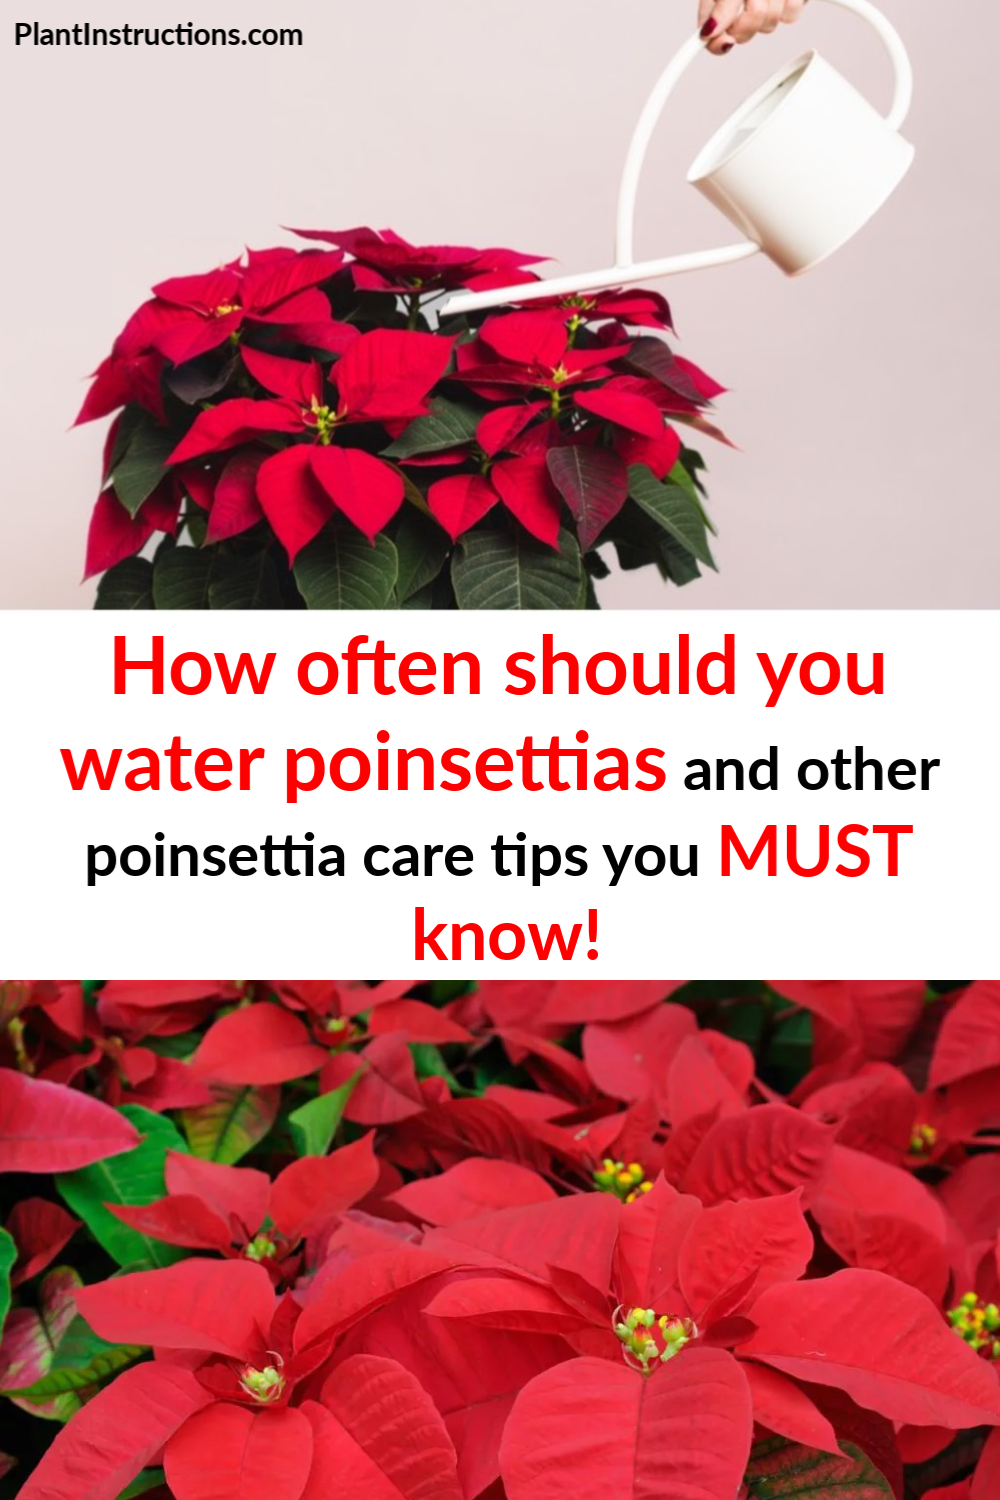 how-often-do-you-water-poinsettias-and-other-poinsettia-plant-care-tips-plant-instructions